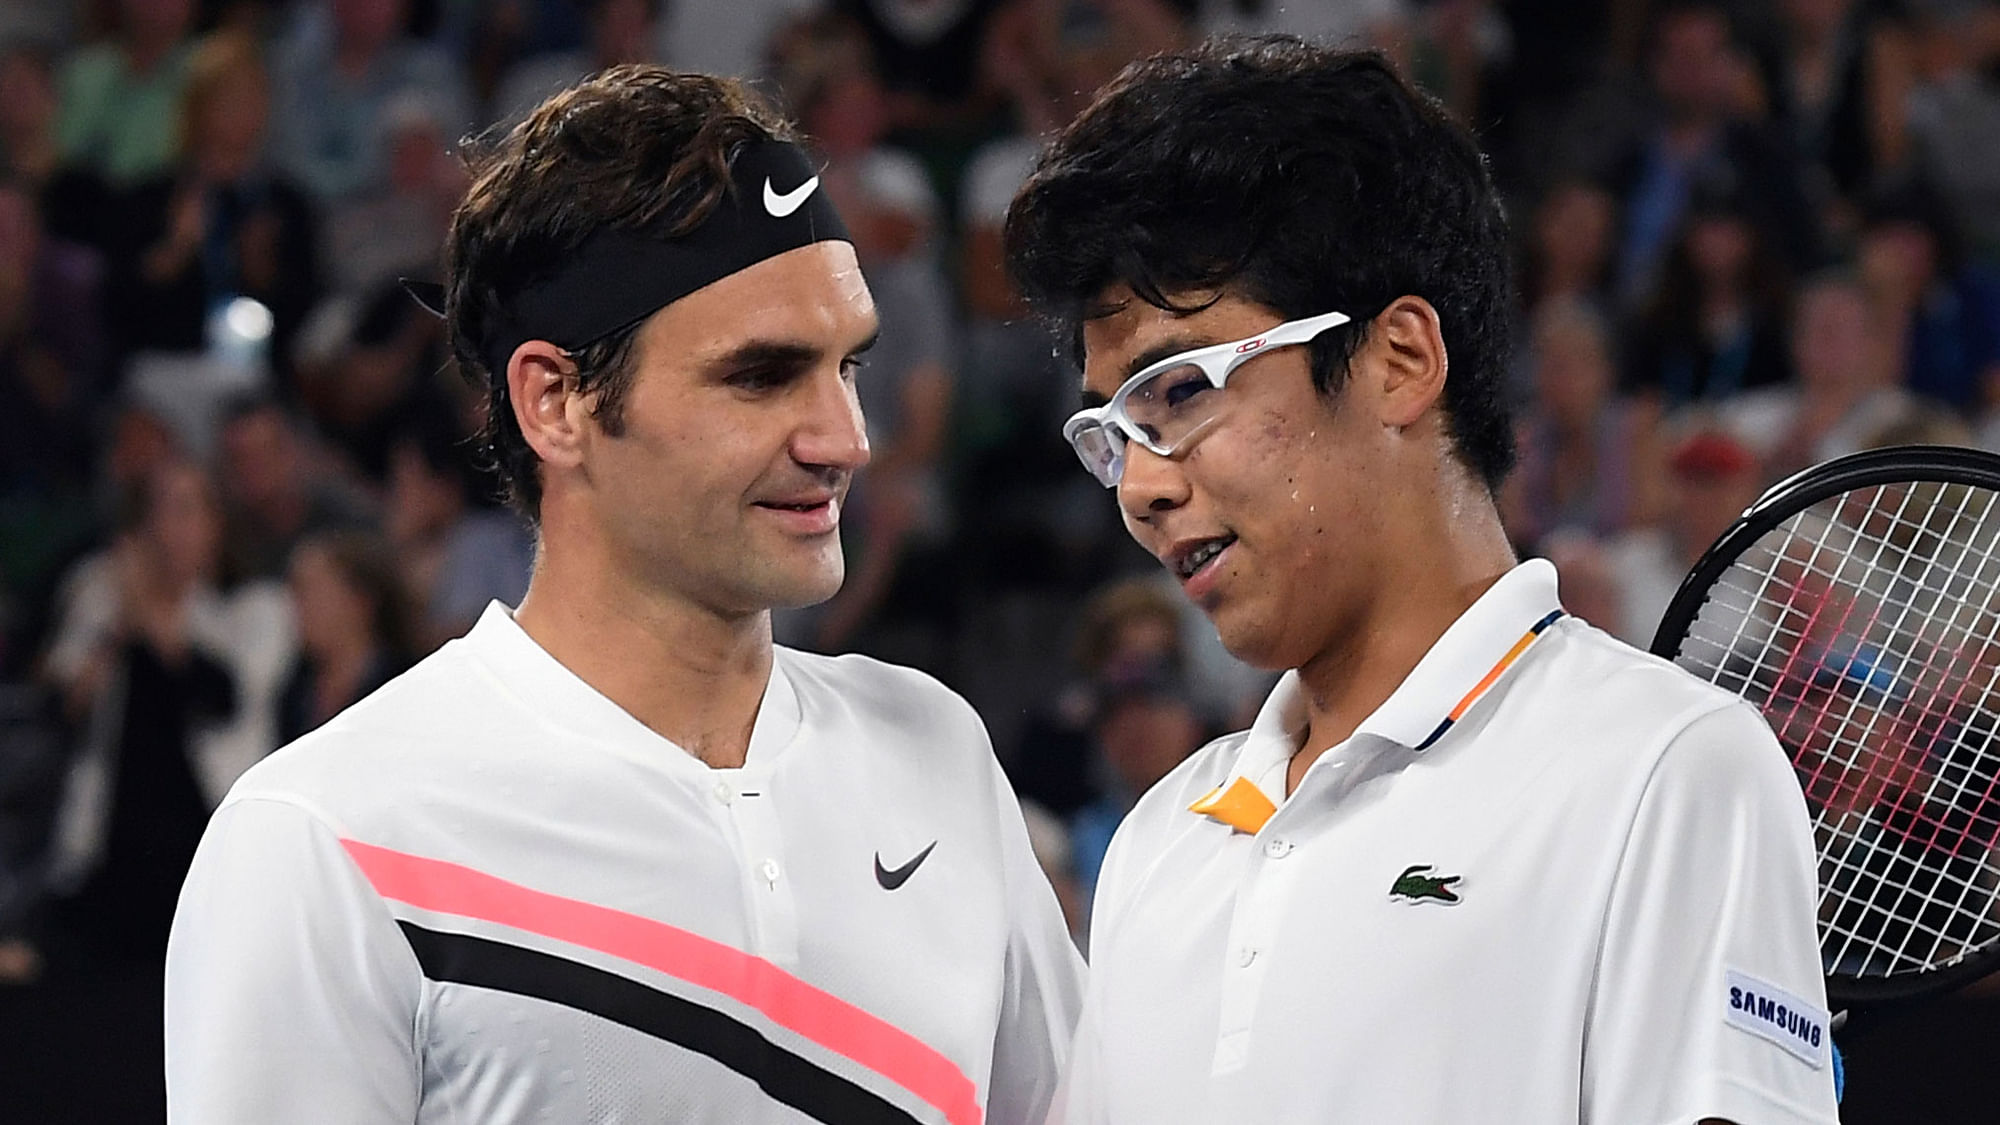 Switzerland’s Roger Federer, left, is congratulated by South Korea’s Hyeon Chung after their semi-final match.